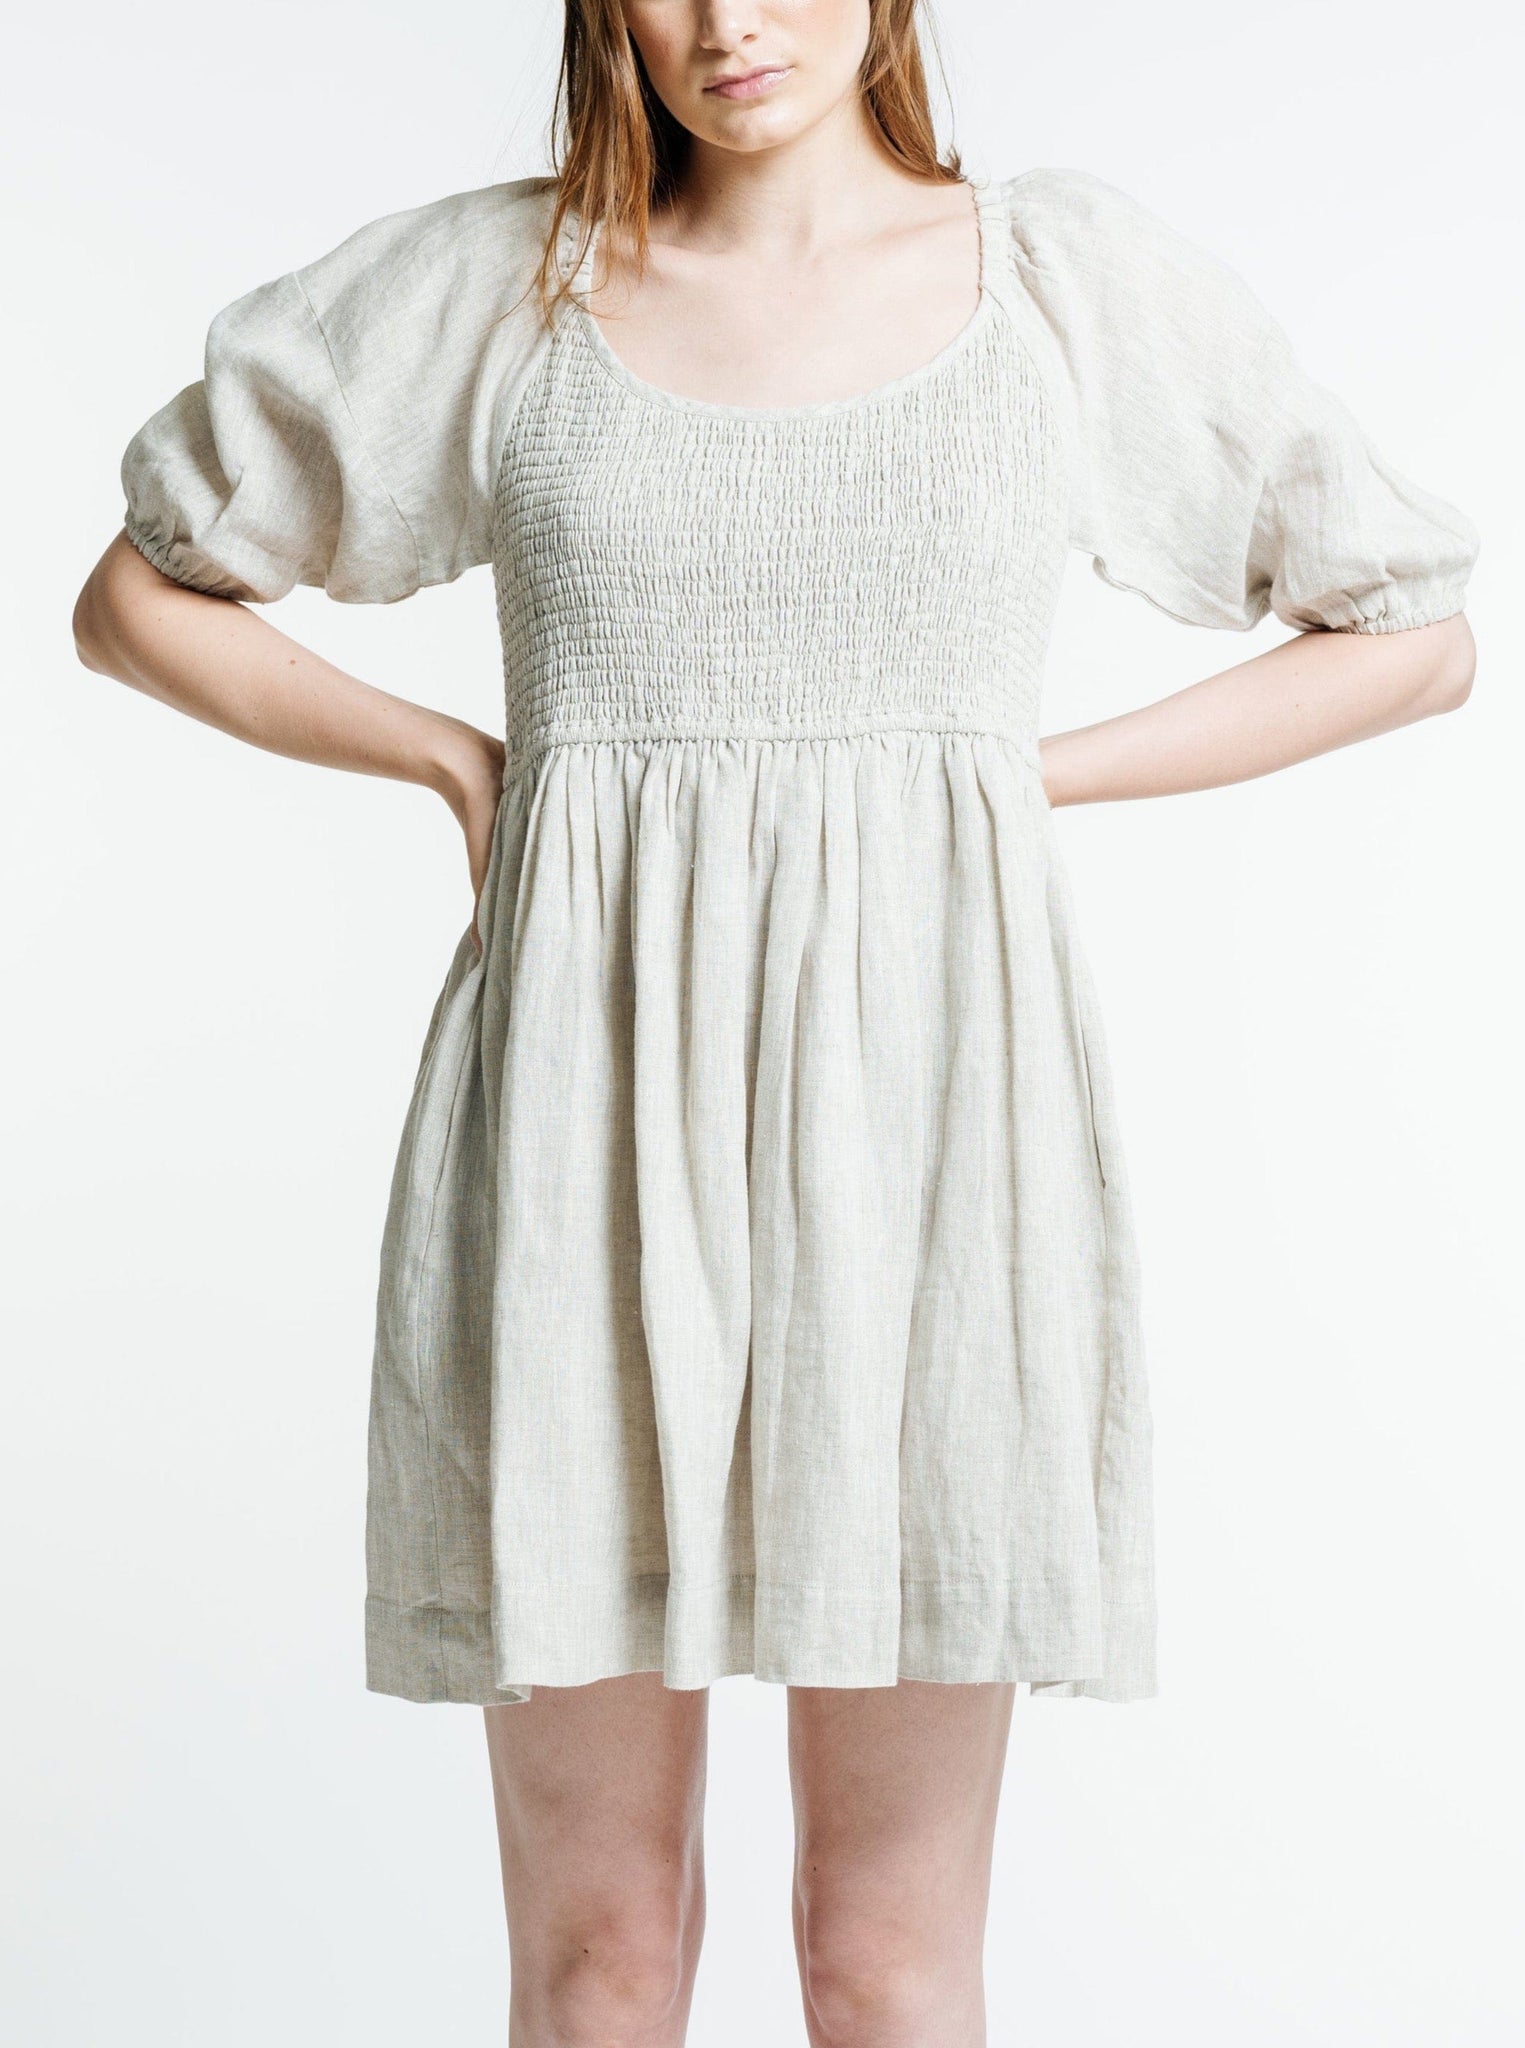 The model is wearing a beige Carmen Mini Dress - Natural - Sample with puff sleeves - perfect for the summer sun.